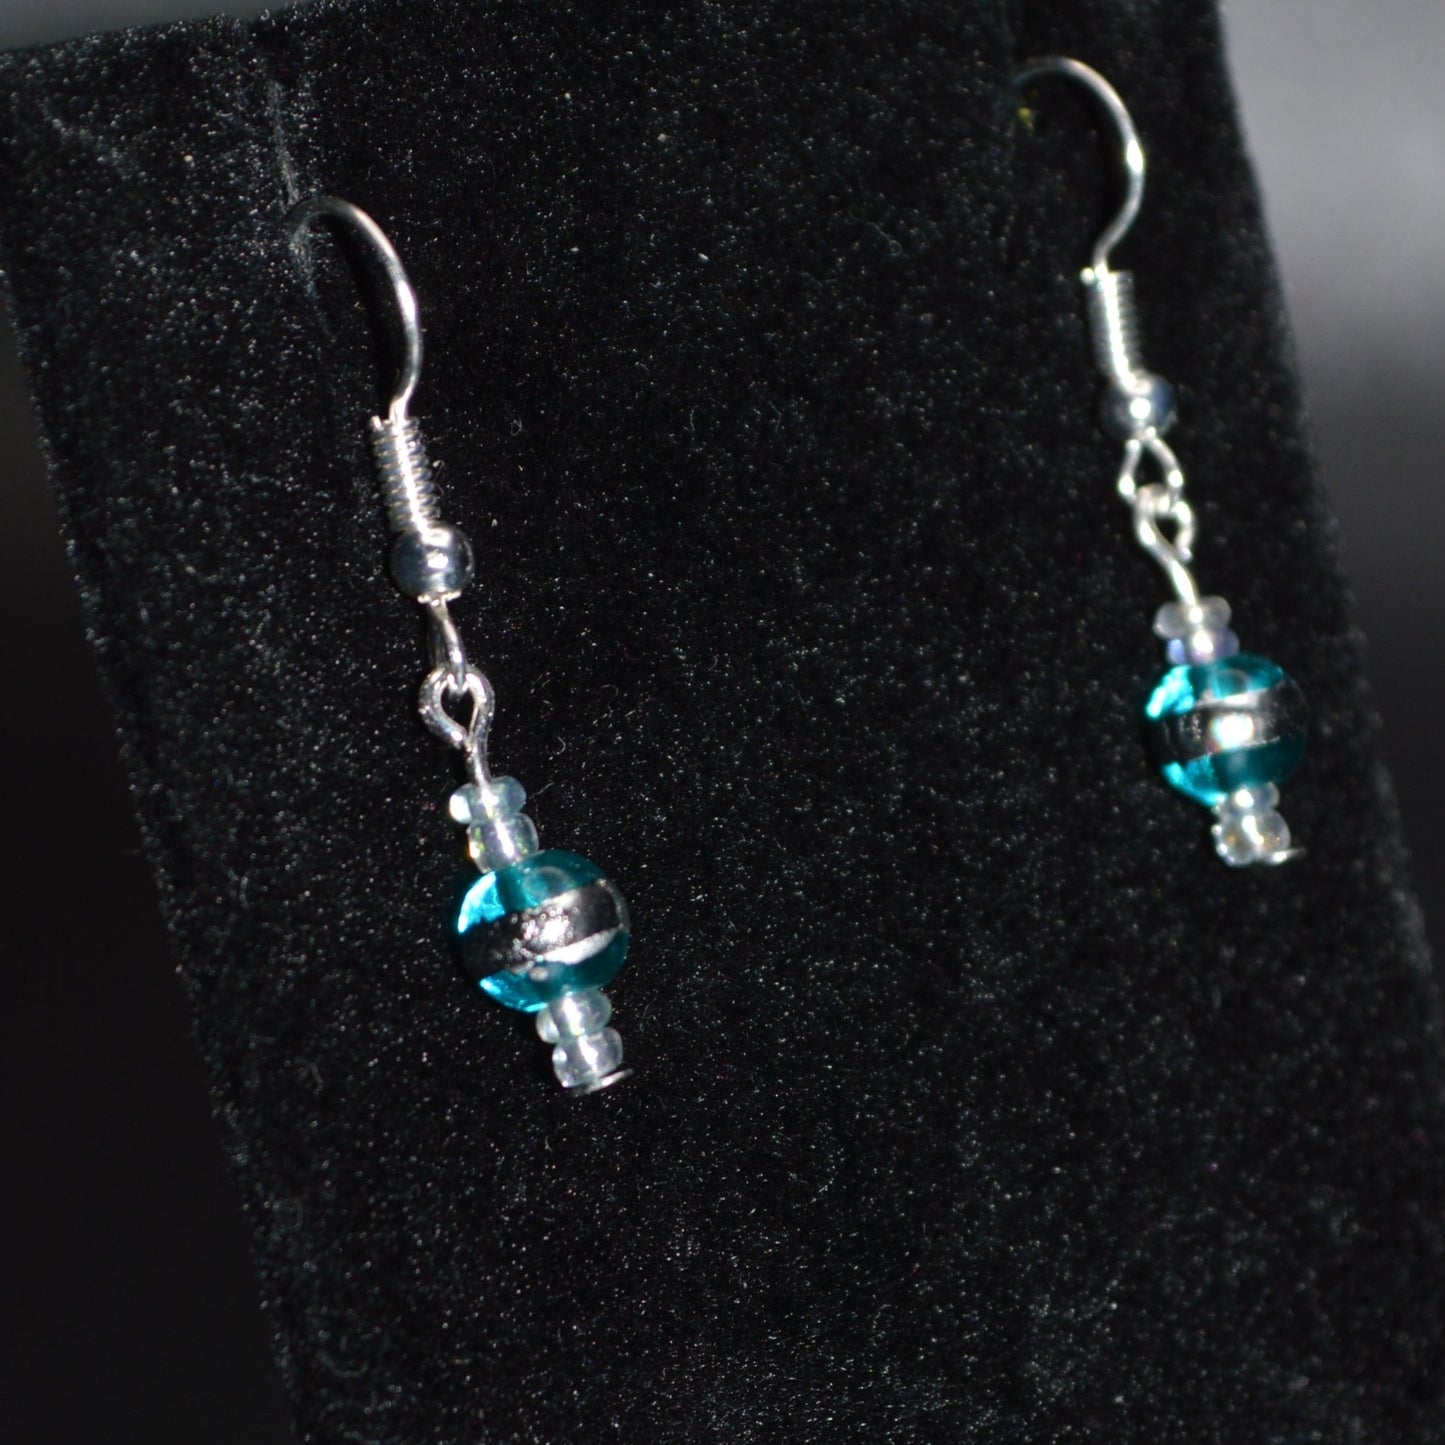 Aqua with a Silver Stripe and Seed Bead Earrings